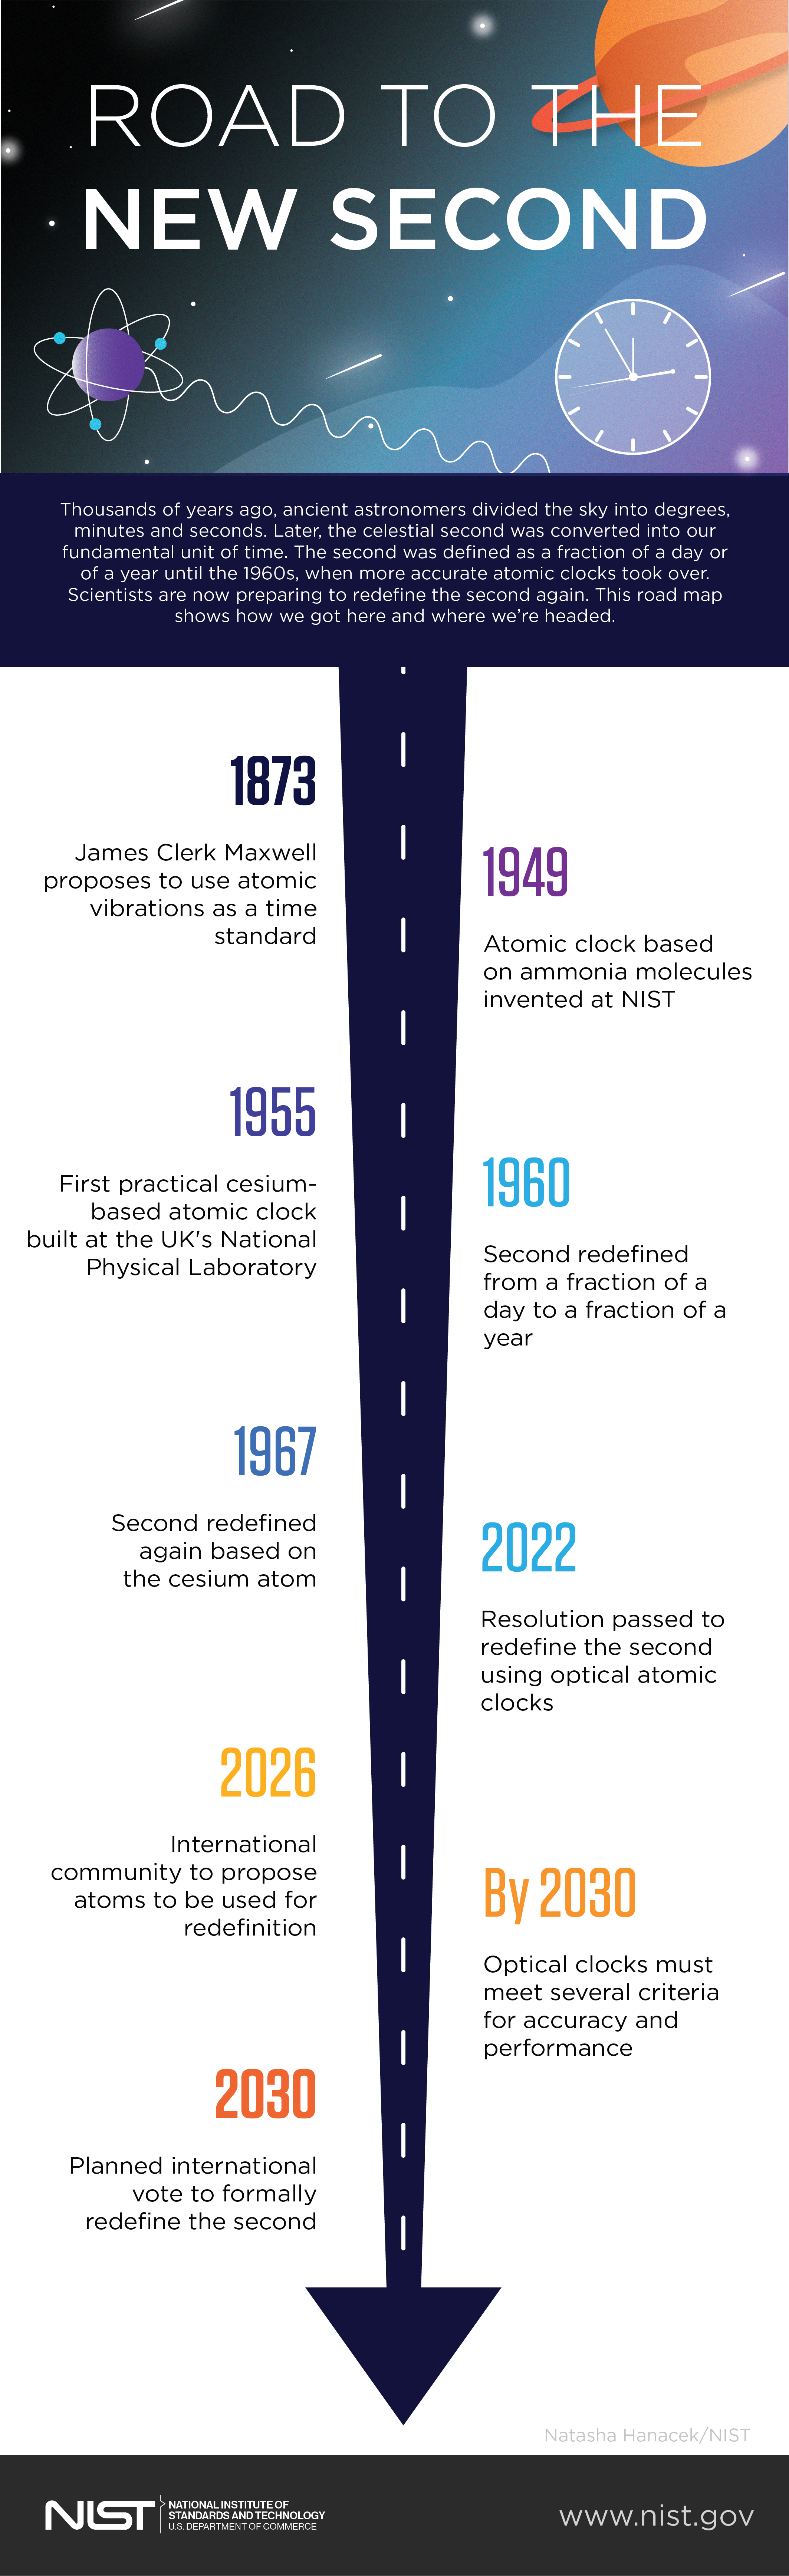 Infographic titled Road to the New Second includes items from 1873 (James Clerk Maxwell proposed to use atomic vibrations as a time standard) to 2030 (planned international vote to formally redefine the second).